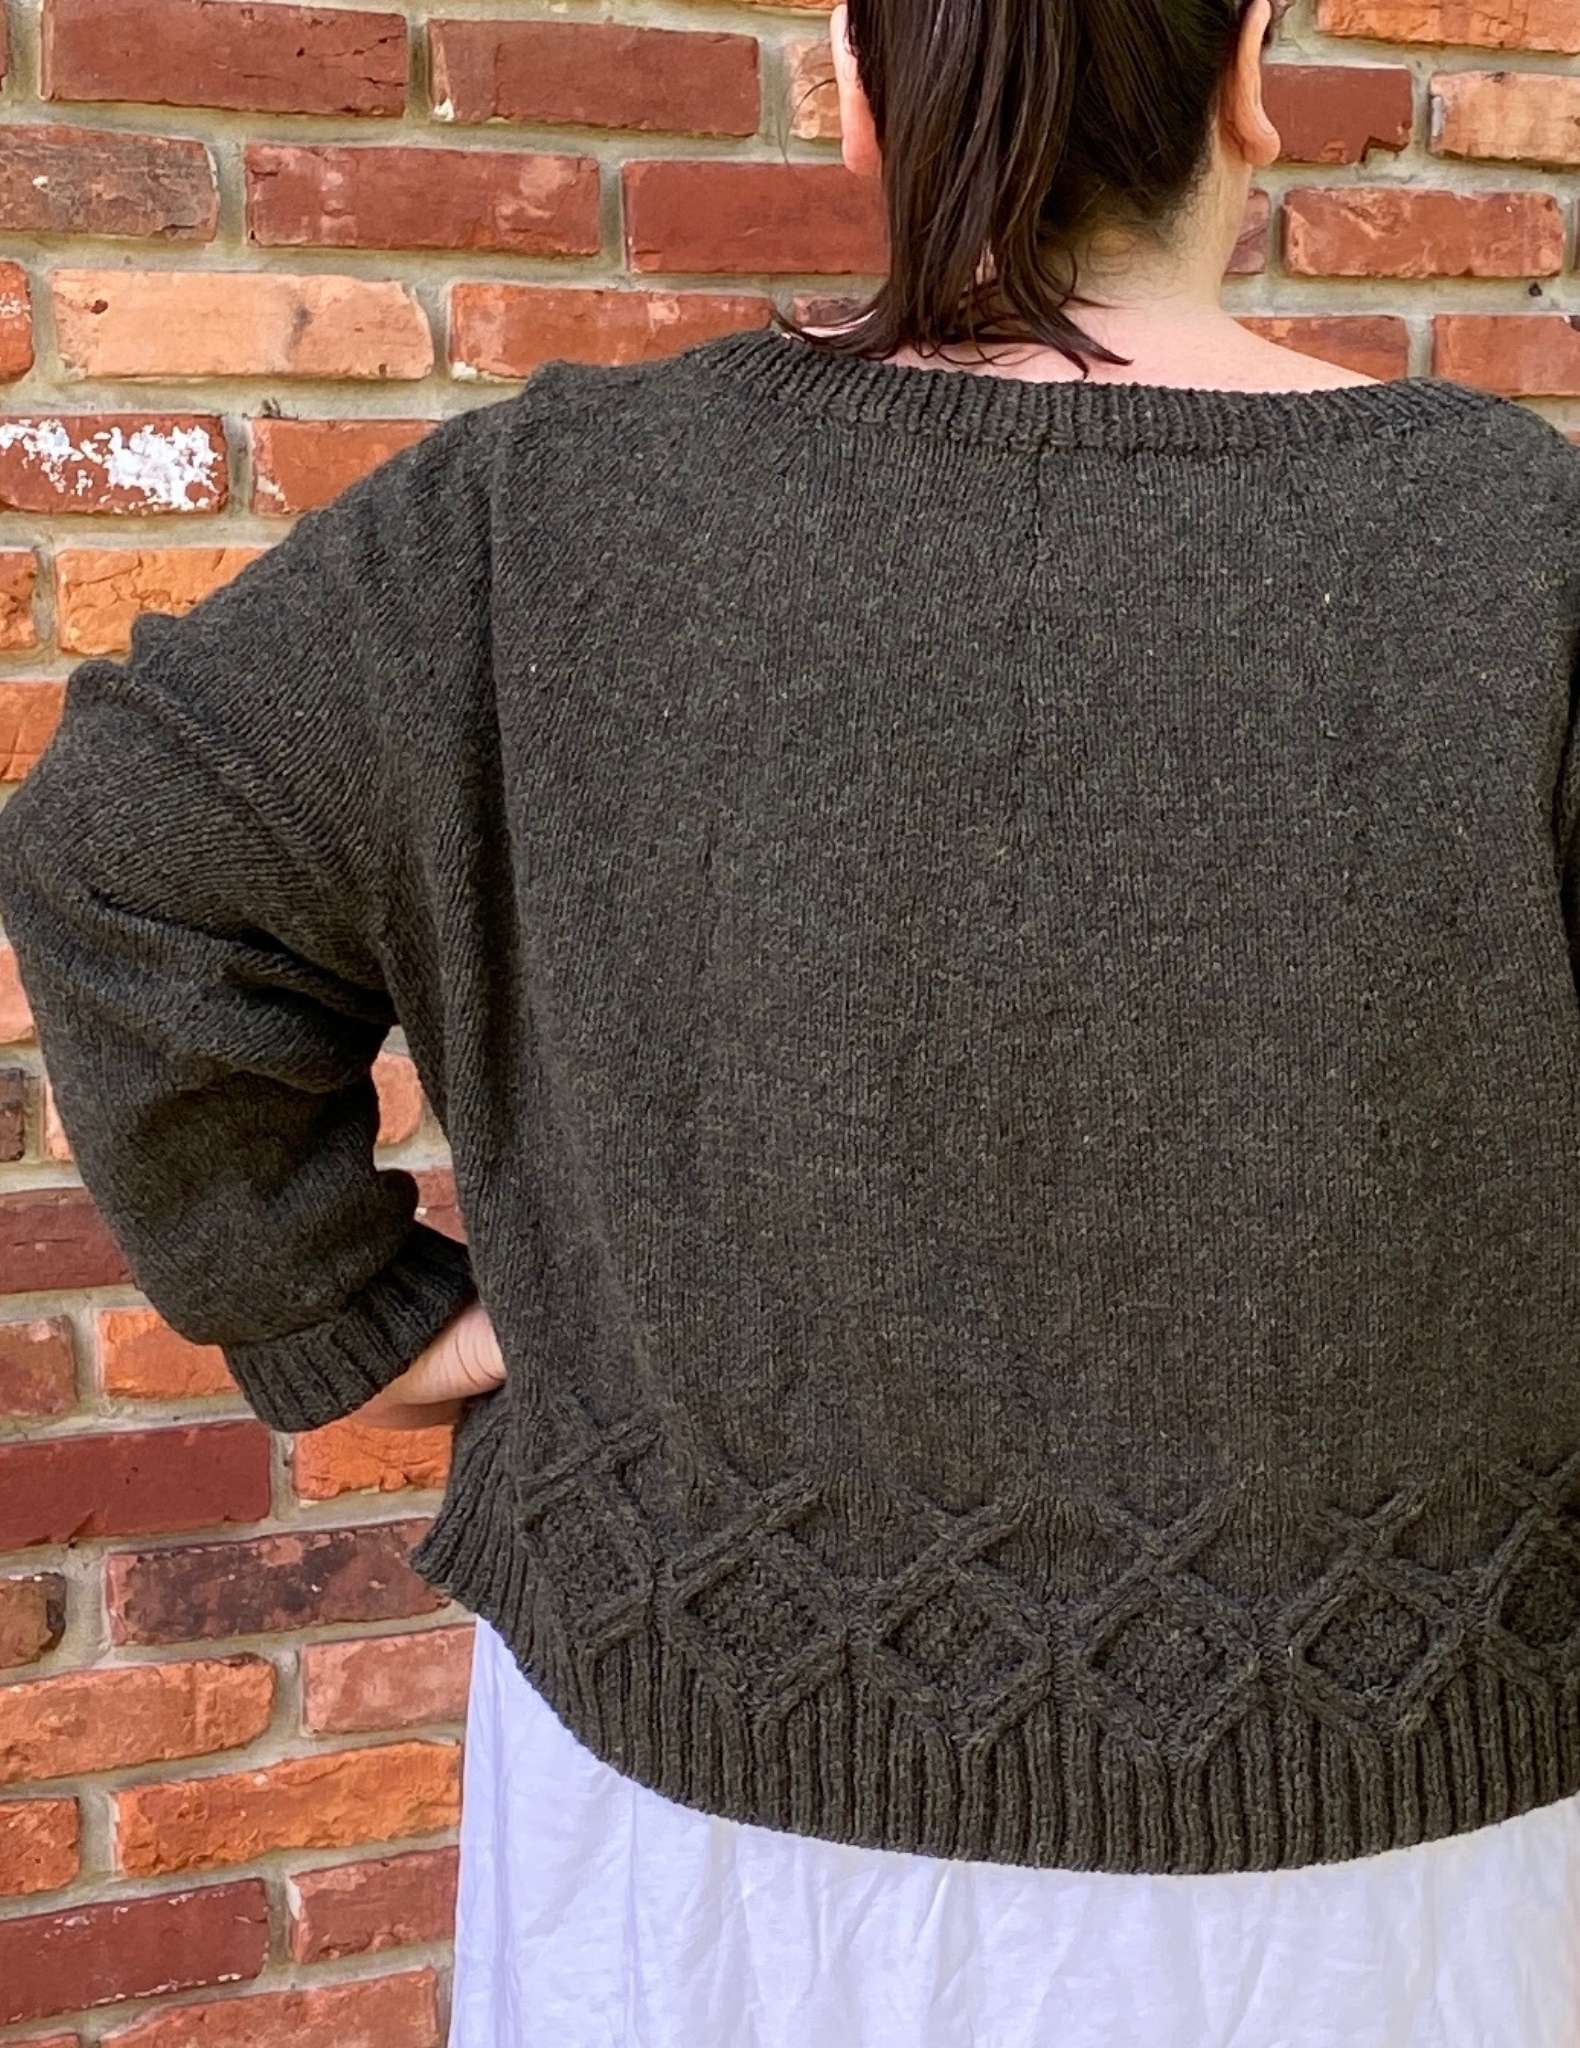 the back of a brown sweater, worn by a model standing in front of a brick wall